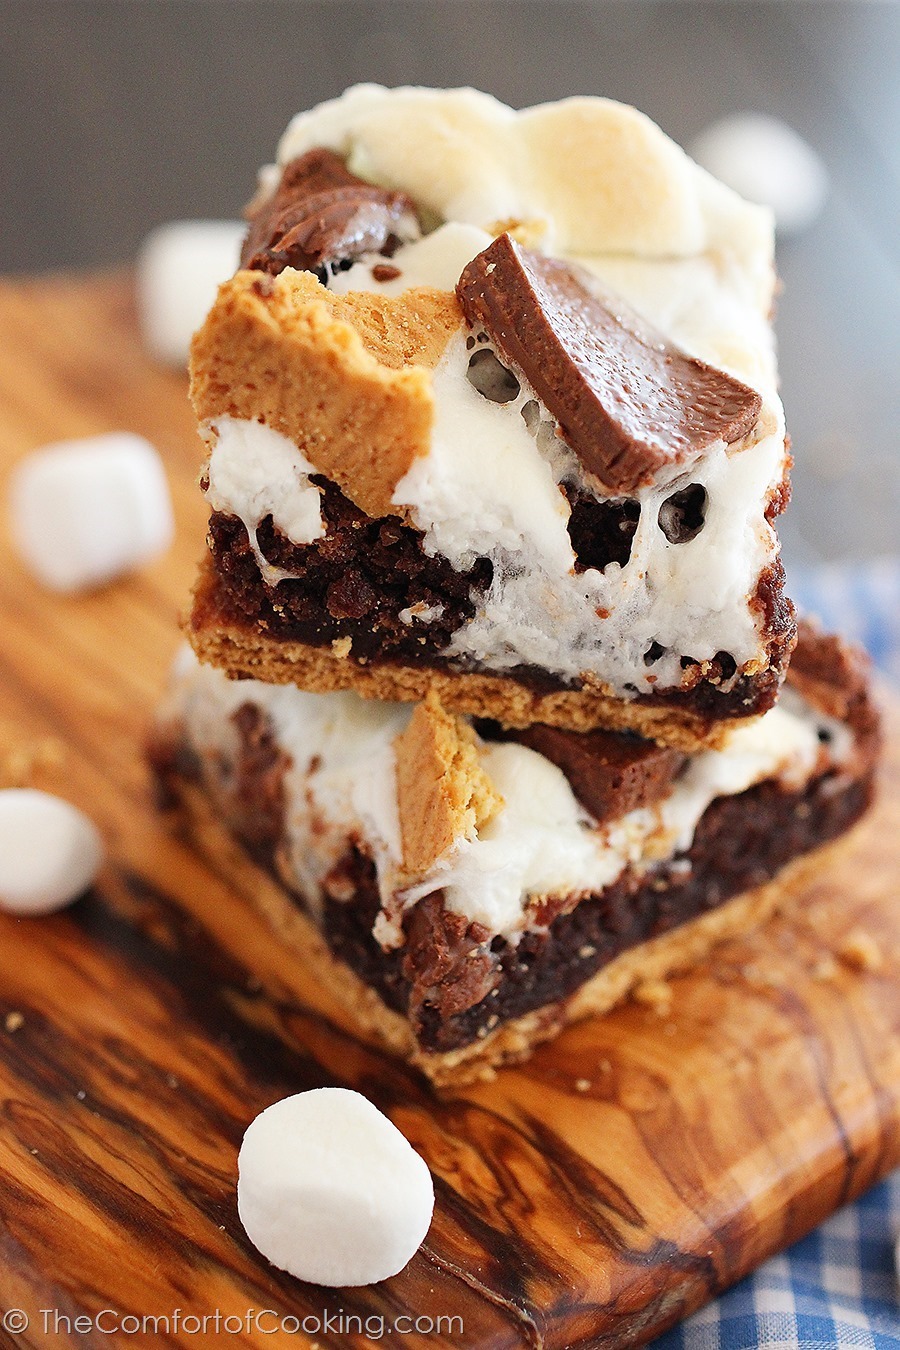 Ooey Gooey S'mores Brownie Bars – These soft, chewy s'mores brownie bars are made with a boxed mix & a few basic ingredients. So easy and delish! | thecomfortofcooking.com